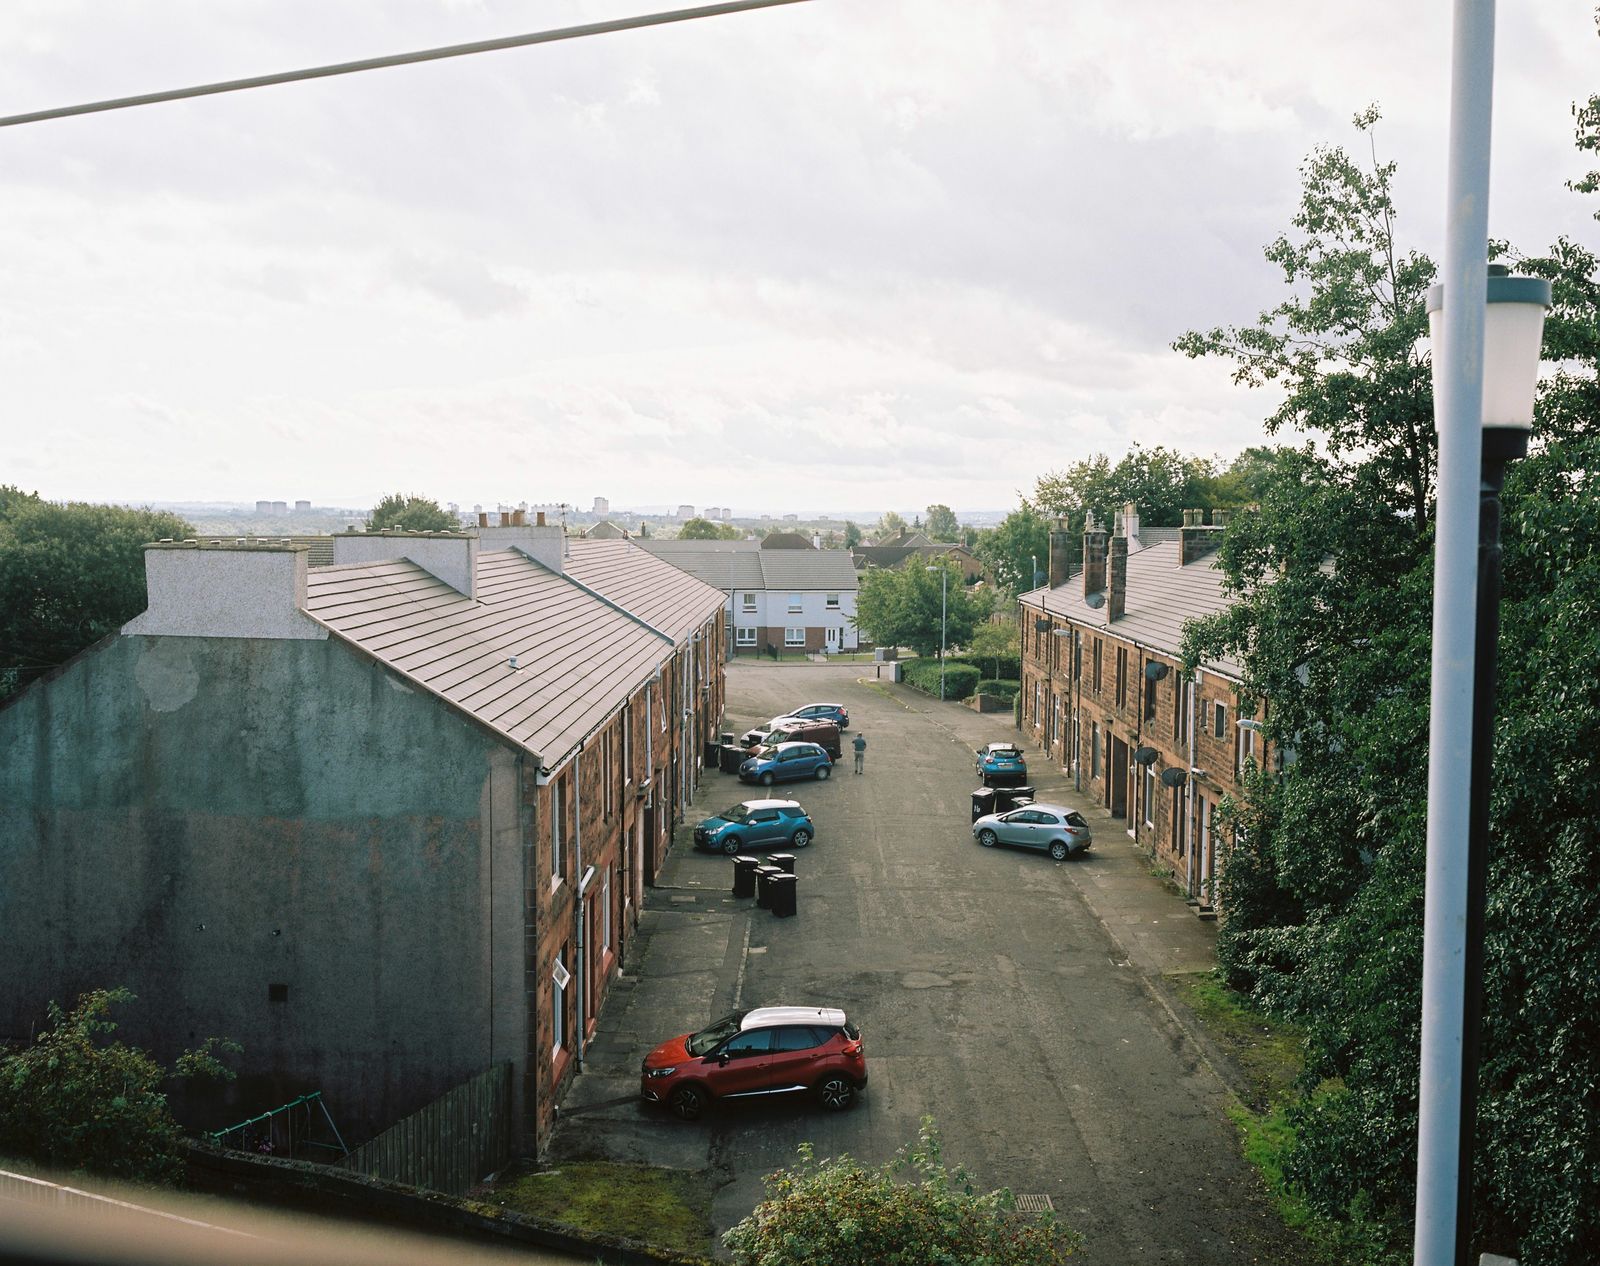 © Kirsty Mackay - Bellshill, looking out towards the new towns.